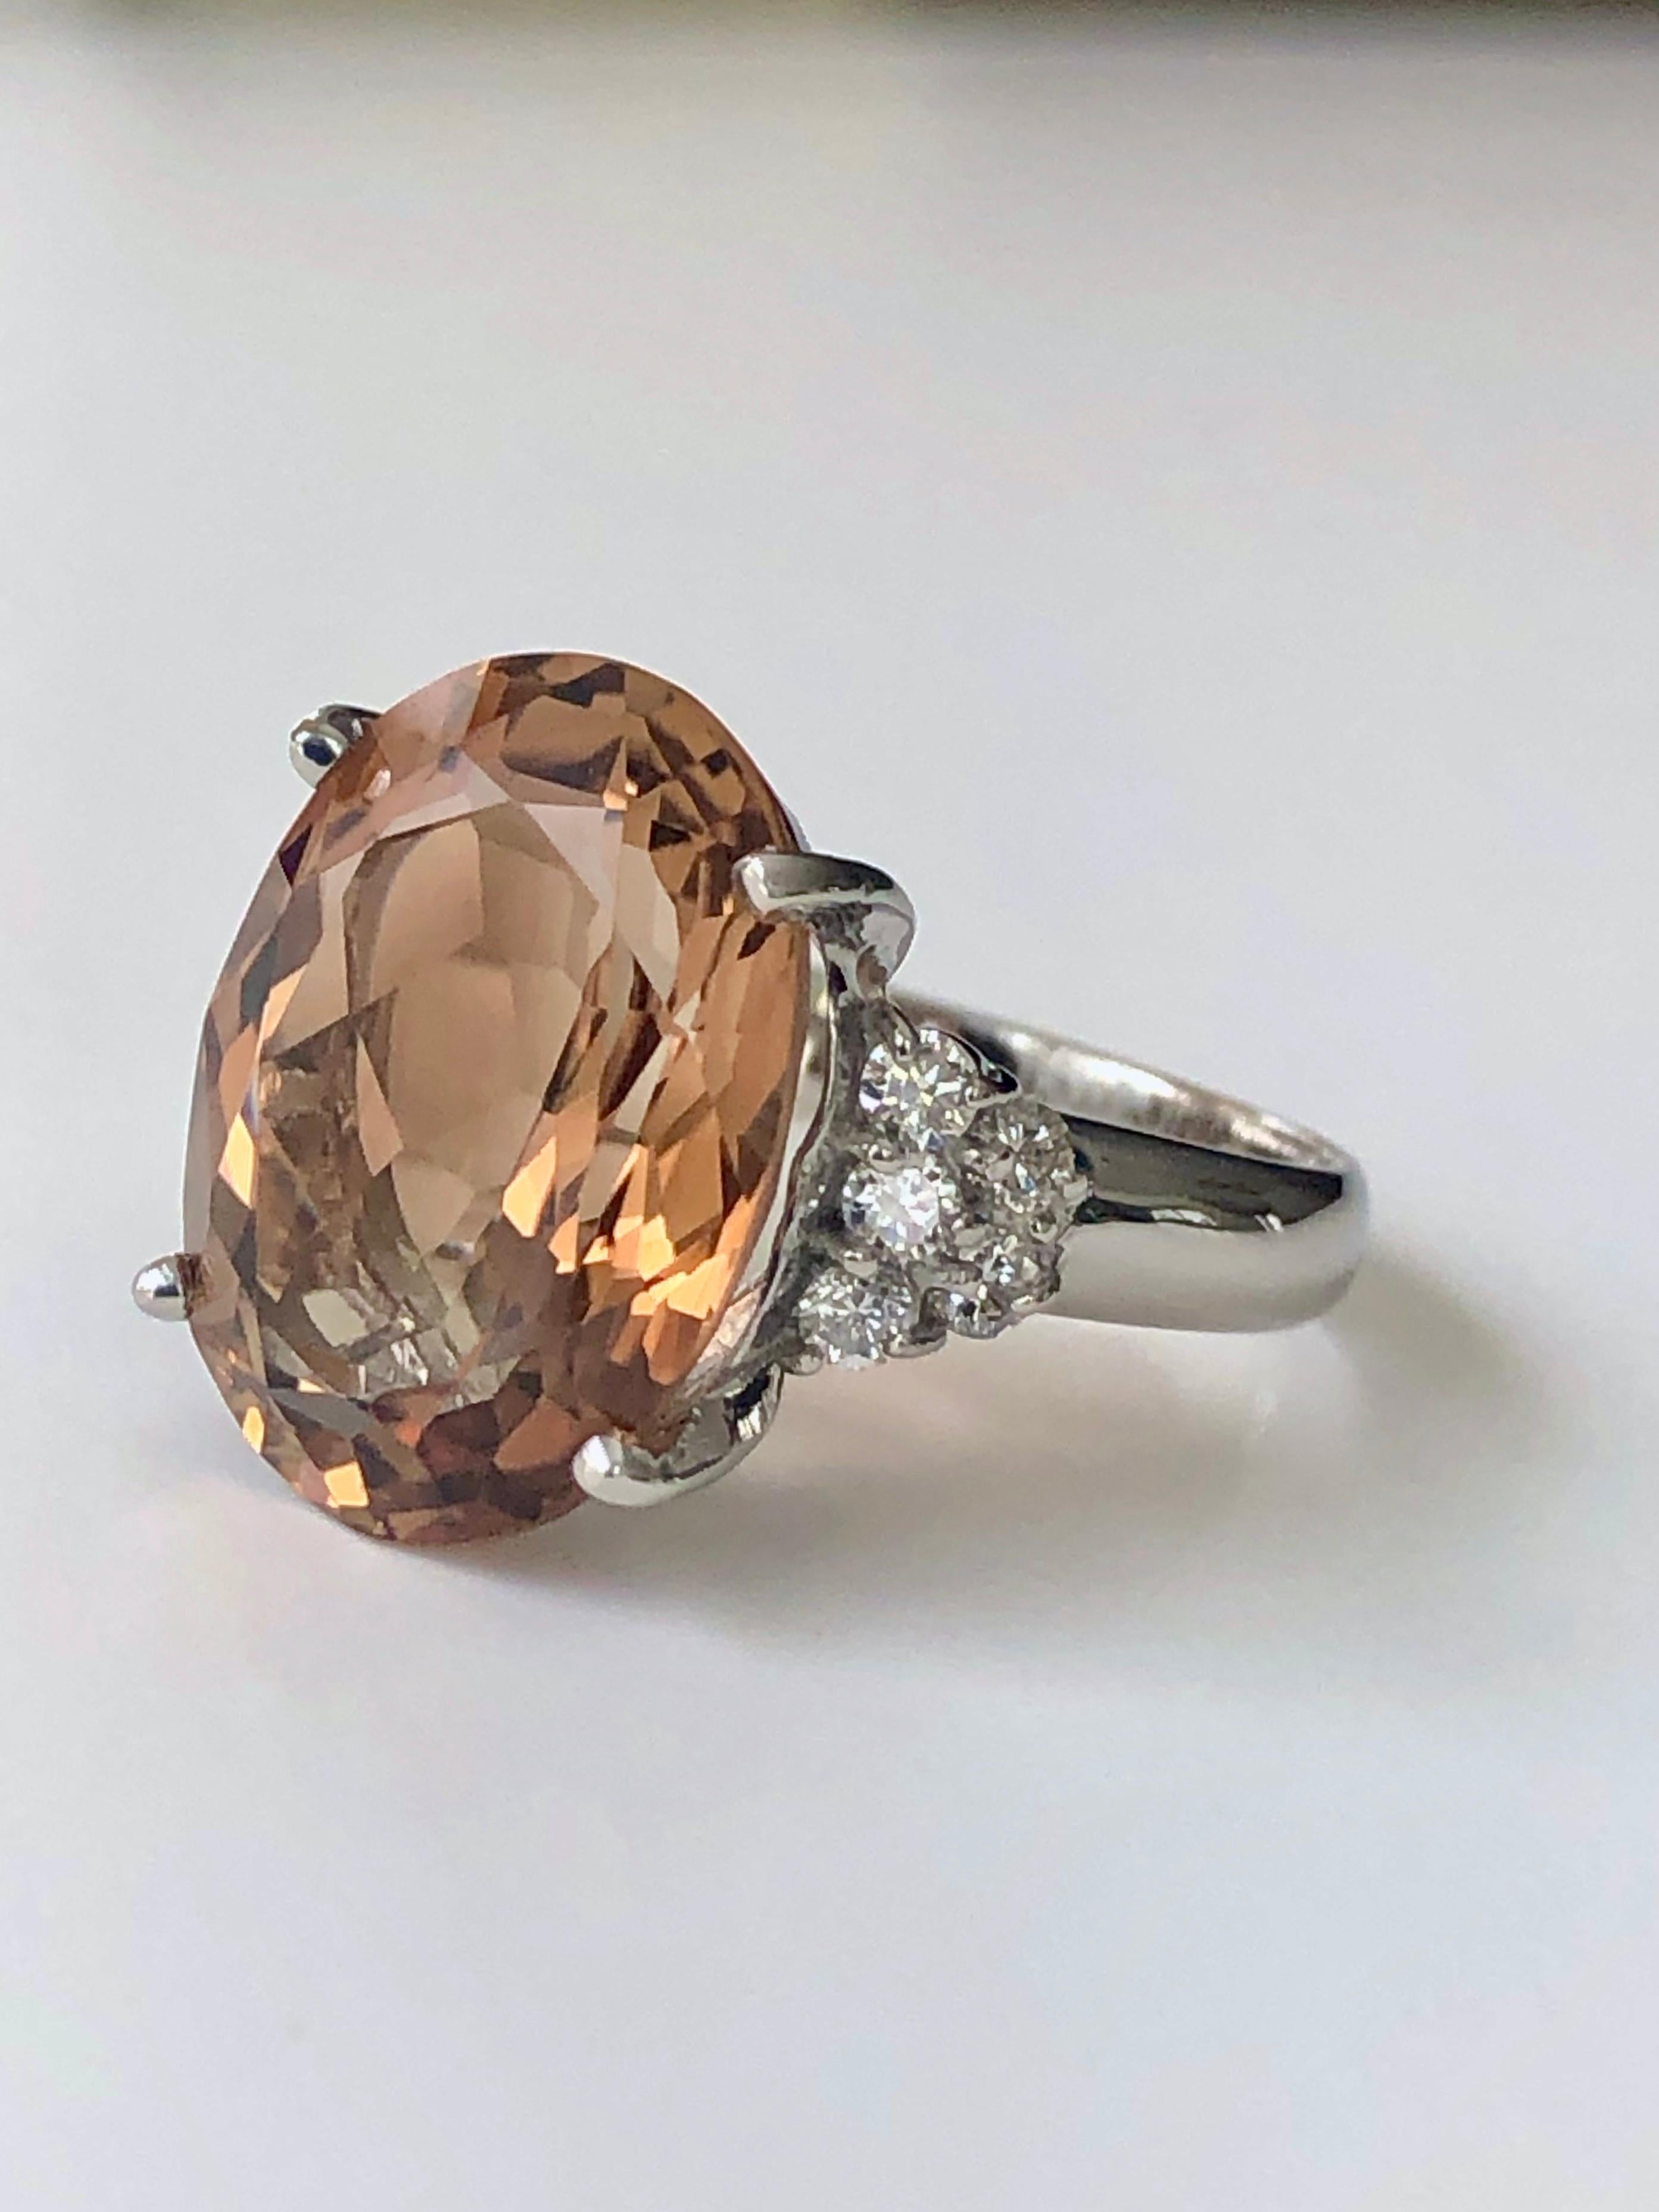 Estate sparkling classic cocktail natural brownish orangish Imperial topaz and diamond ring platinum 900
Main stone: Untreated Natural Topaz Oval Cut 10.46 carat
Side stone: Diamond 0.32 carat G, SI2
Total Gemstone; 10.78 Carats
Size: 6.75
Weight: